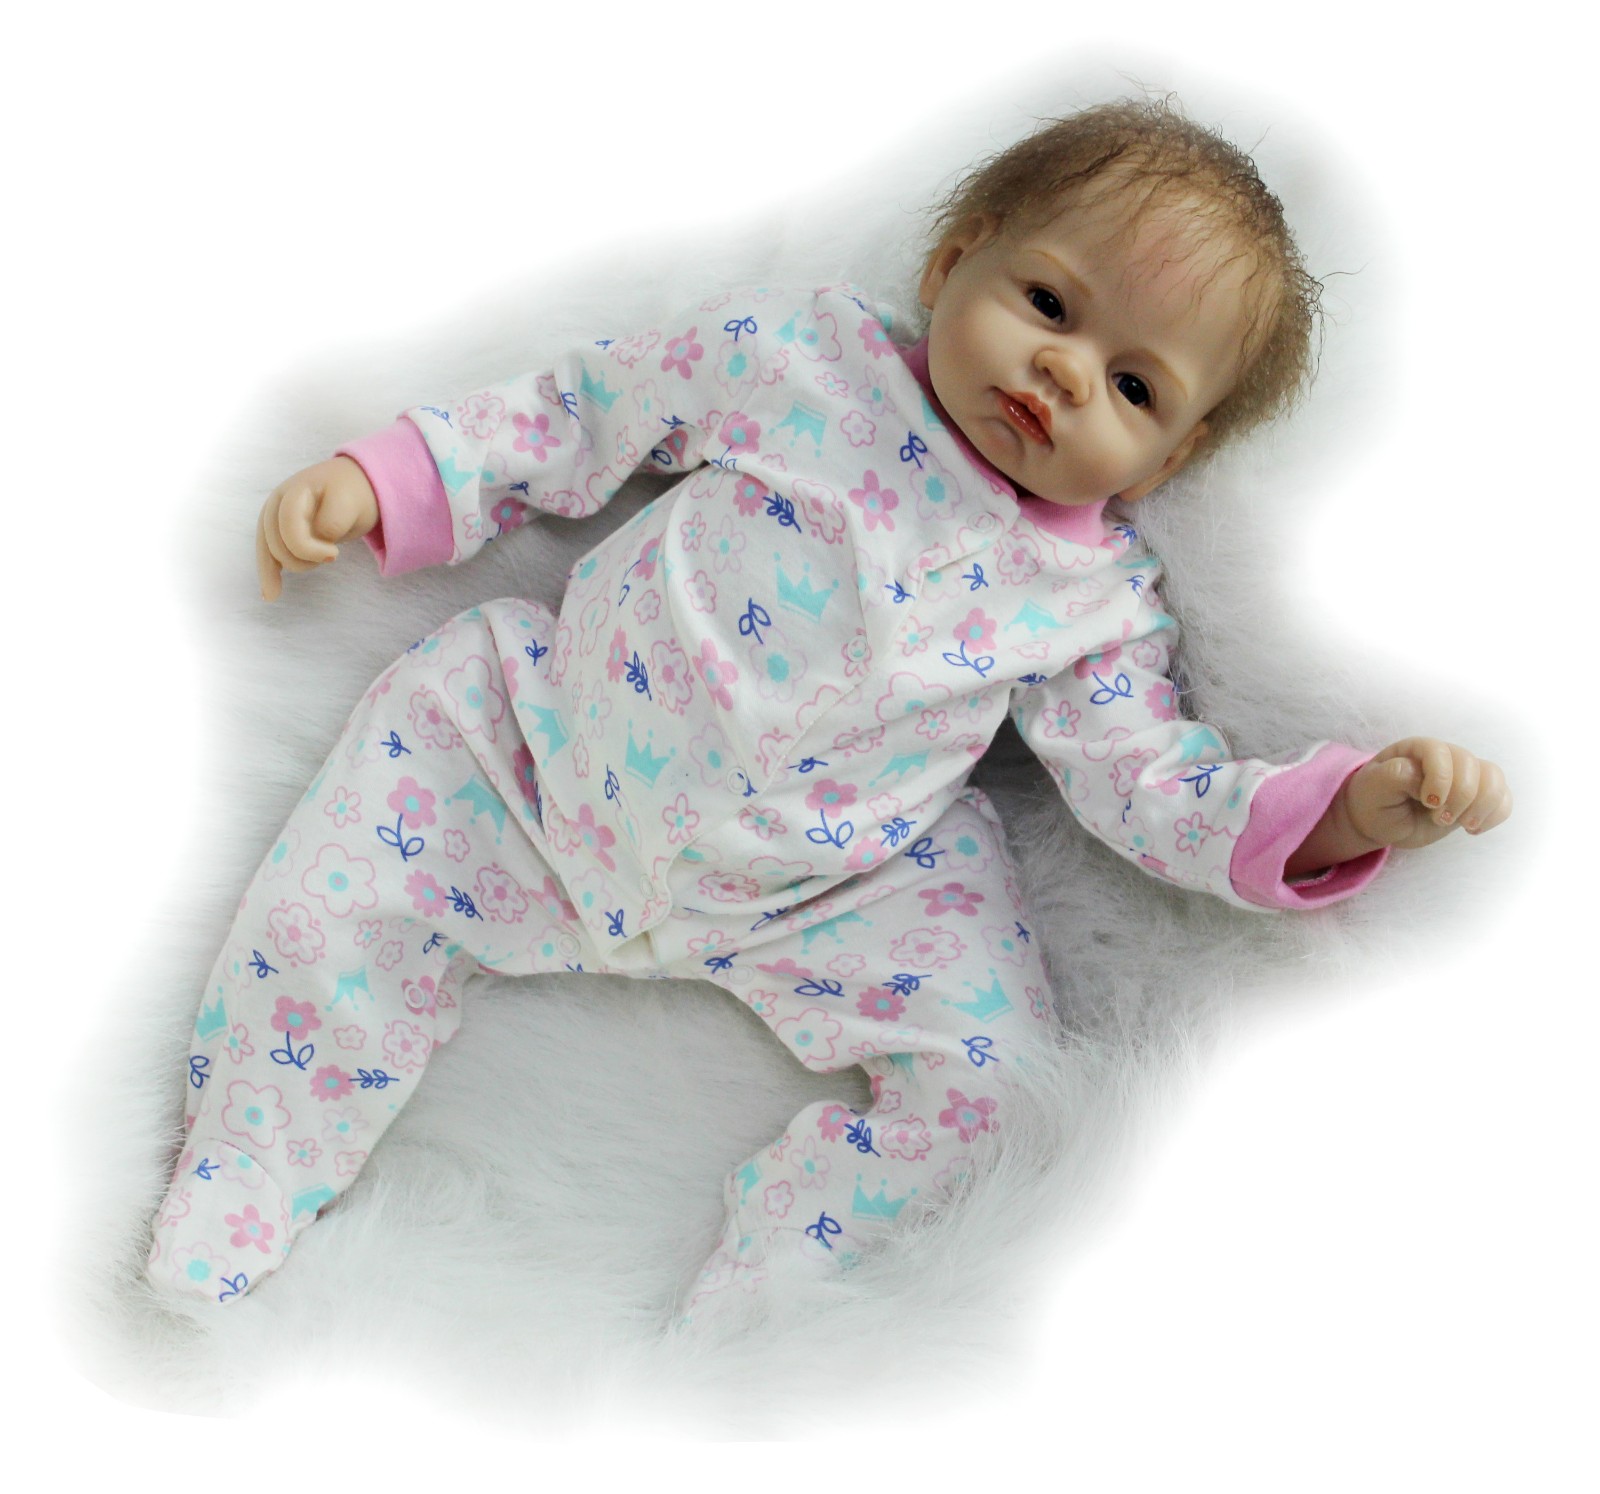 Life Size Baby Doll Silicone Vinyl 22 Inch Wholesale Baby ...